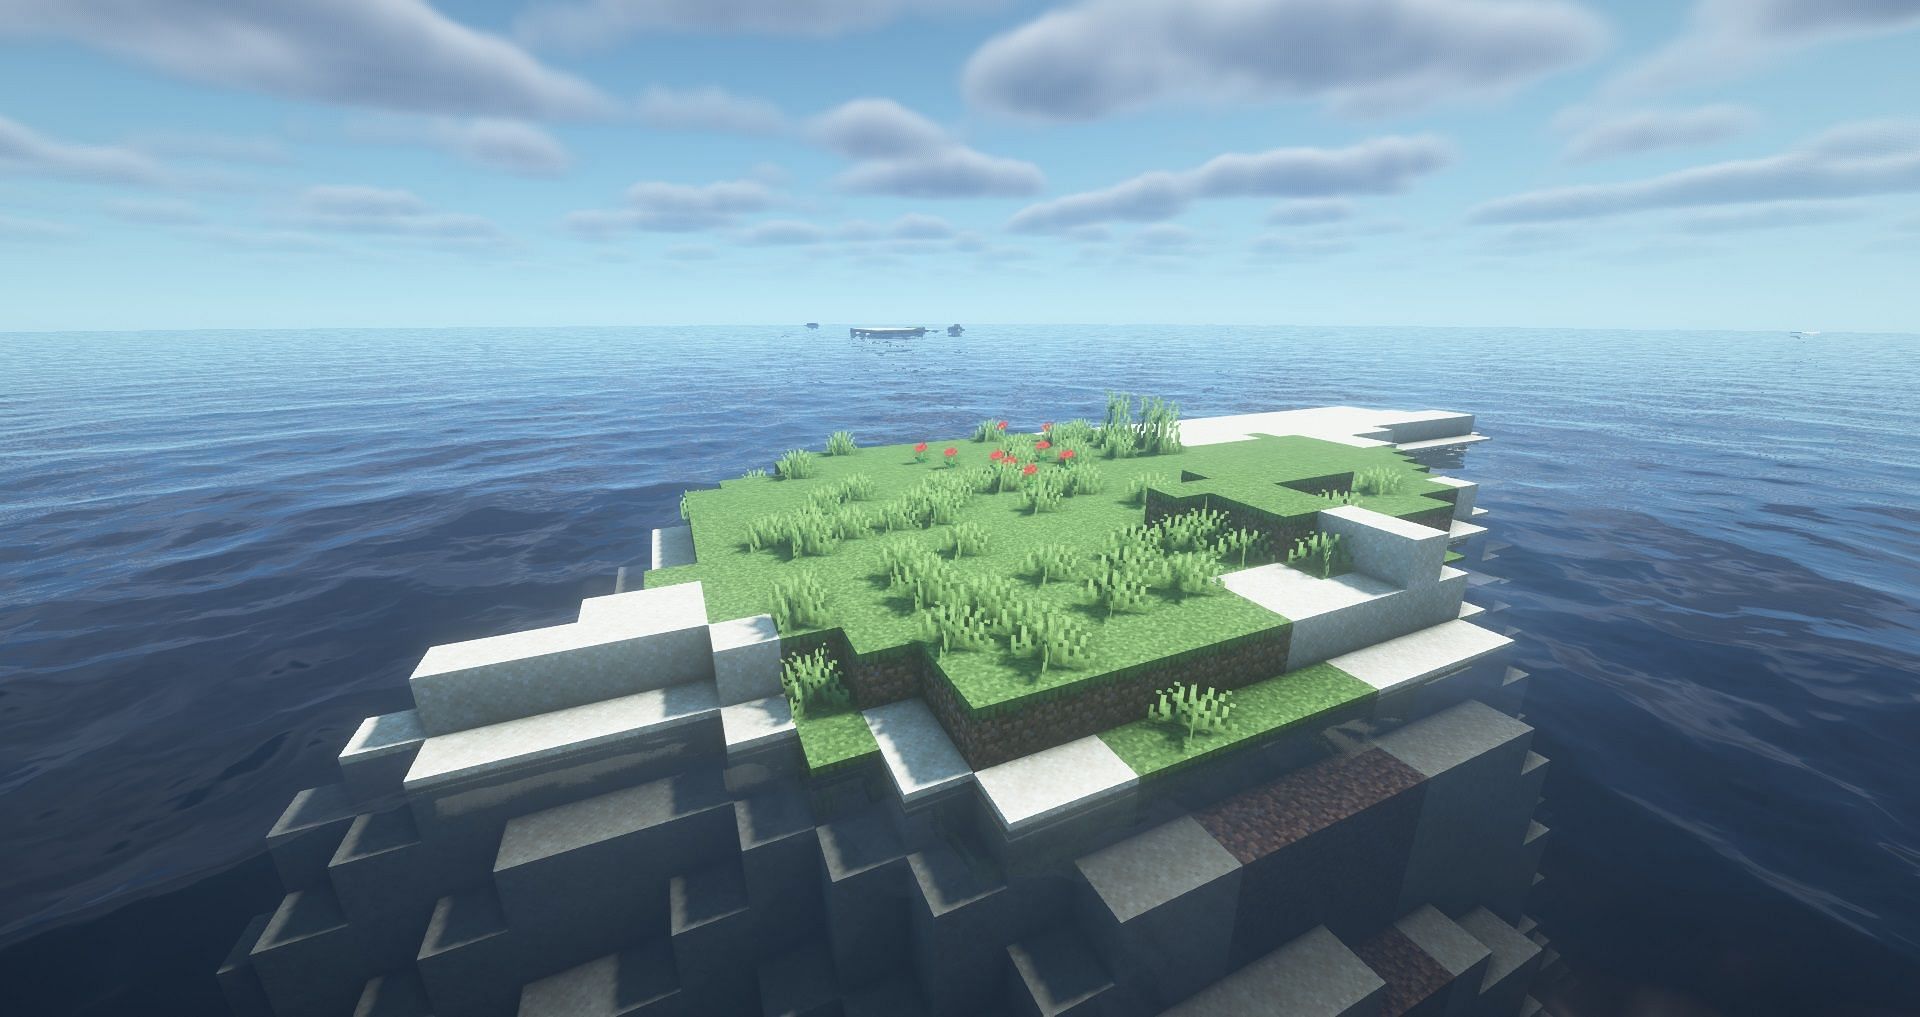 The tiny island presents players with a challenge (Image via Minecraft)